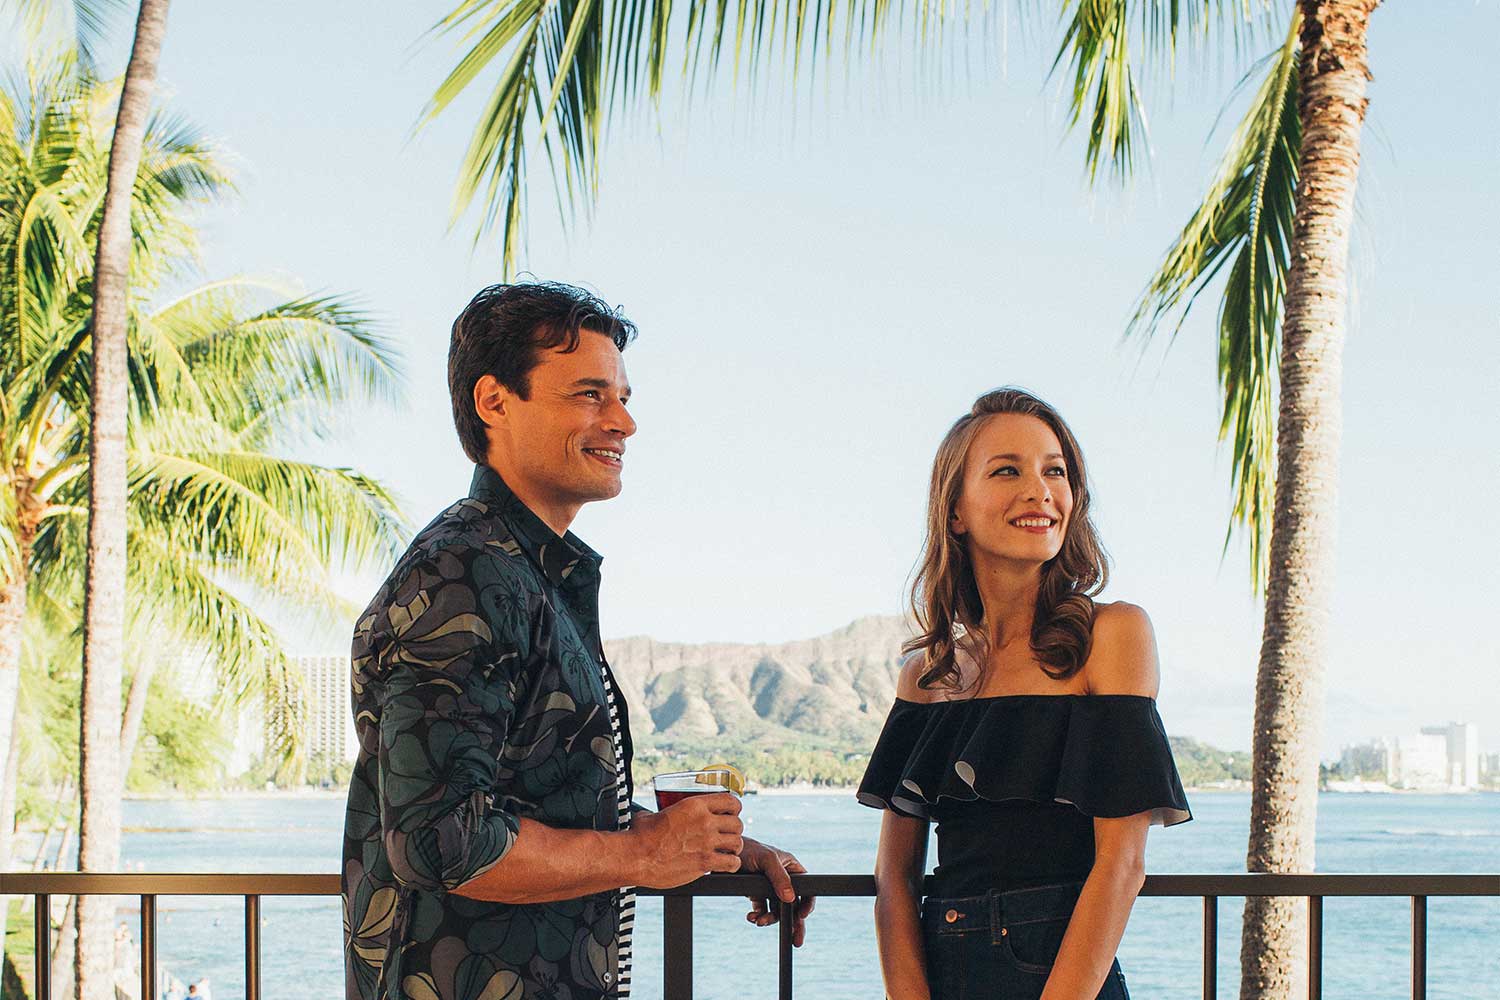 man and woman standing on hotel balcony with palm trees and Diamondhead in background